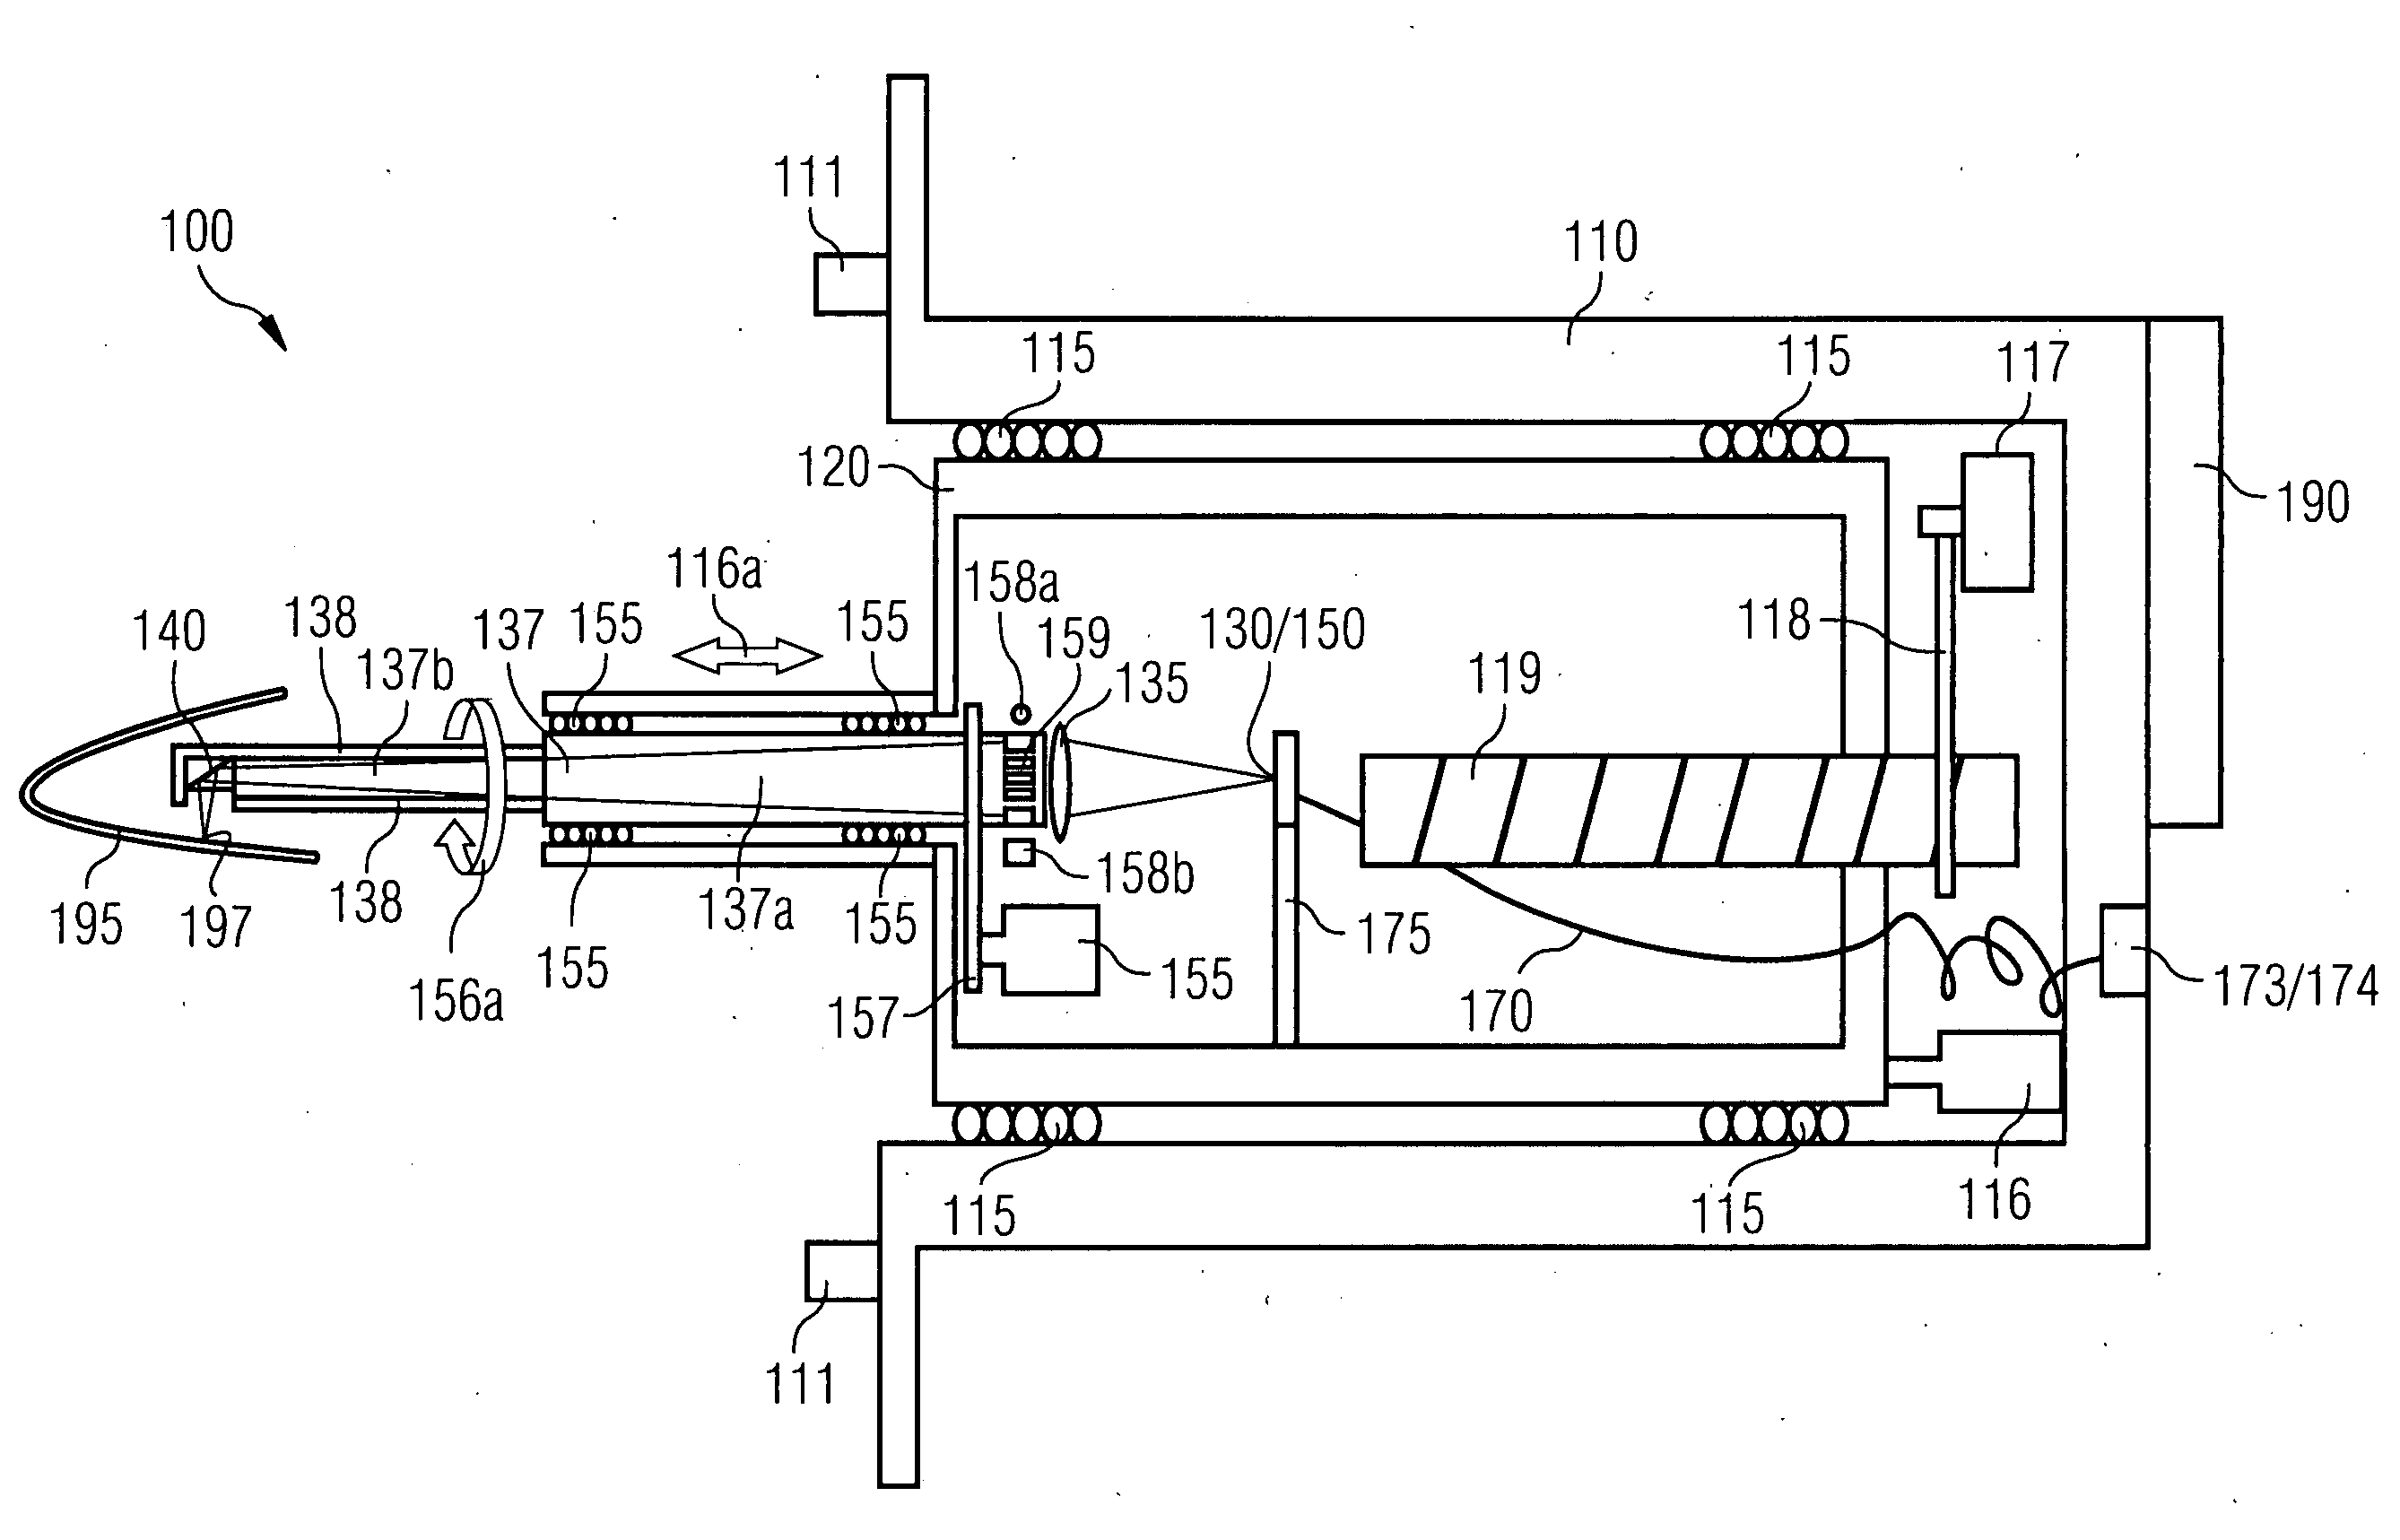 Optical measuring device for measuring a cavity